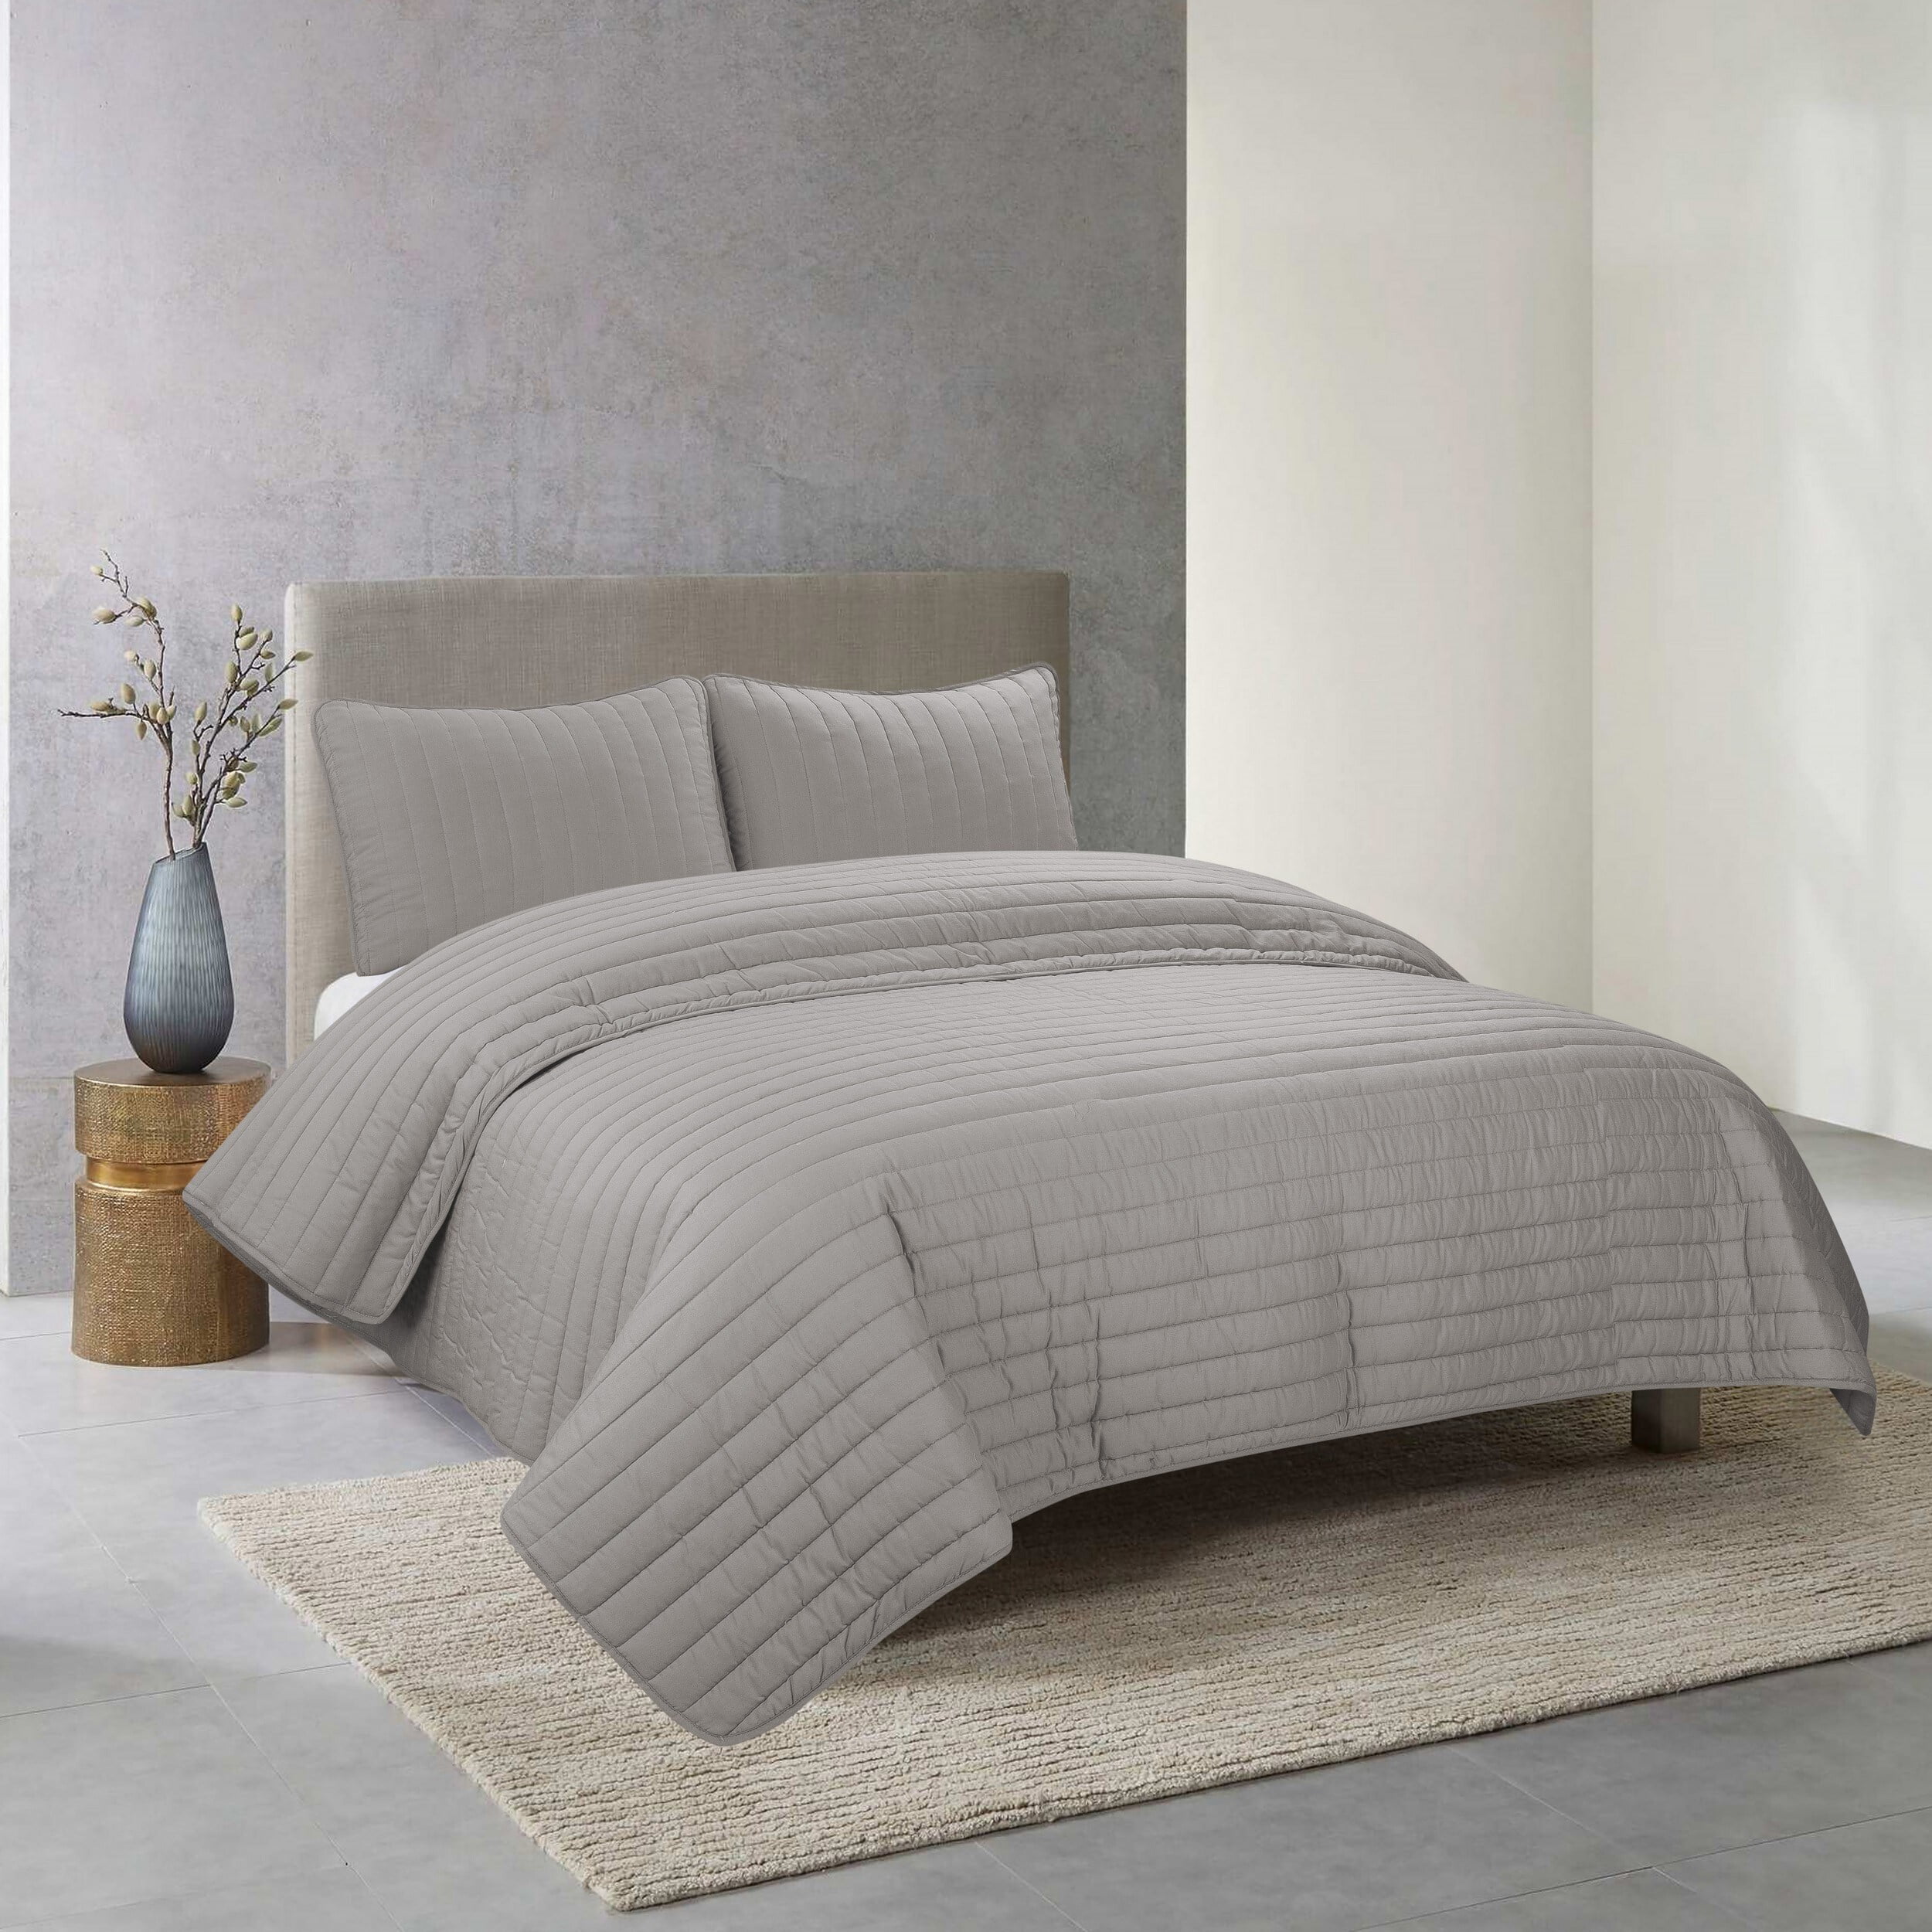 3 Piece Chanel Stitched Queen Comforter Set, Gray 